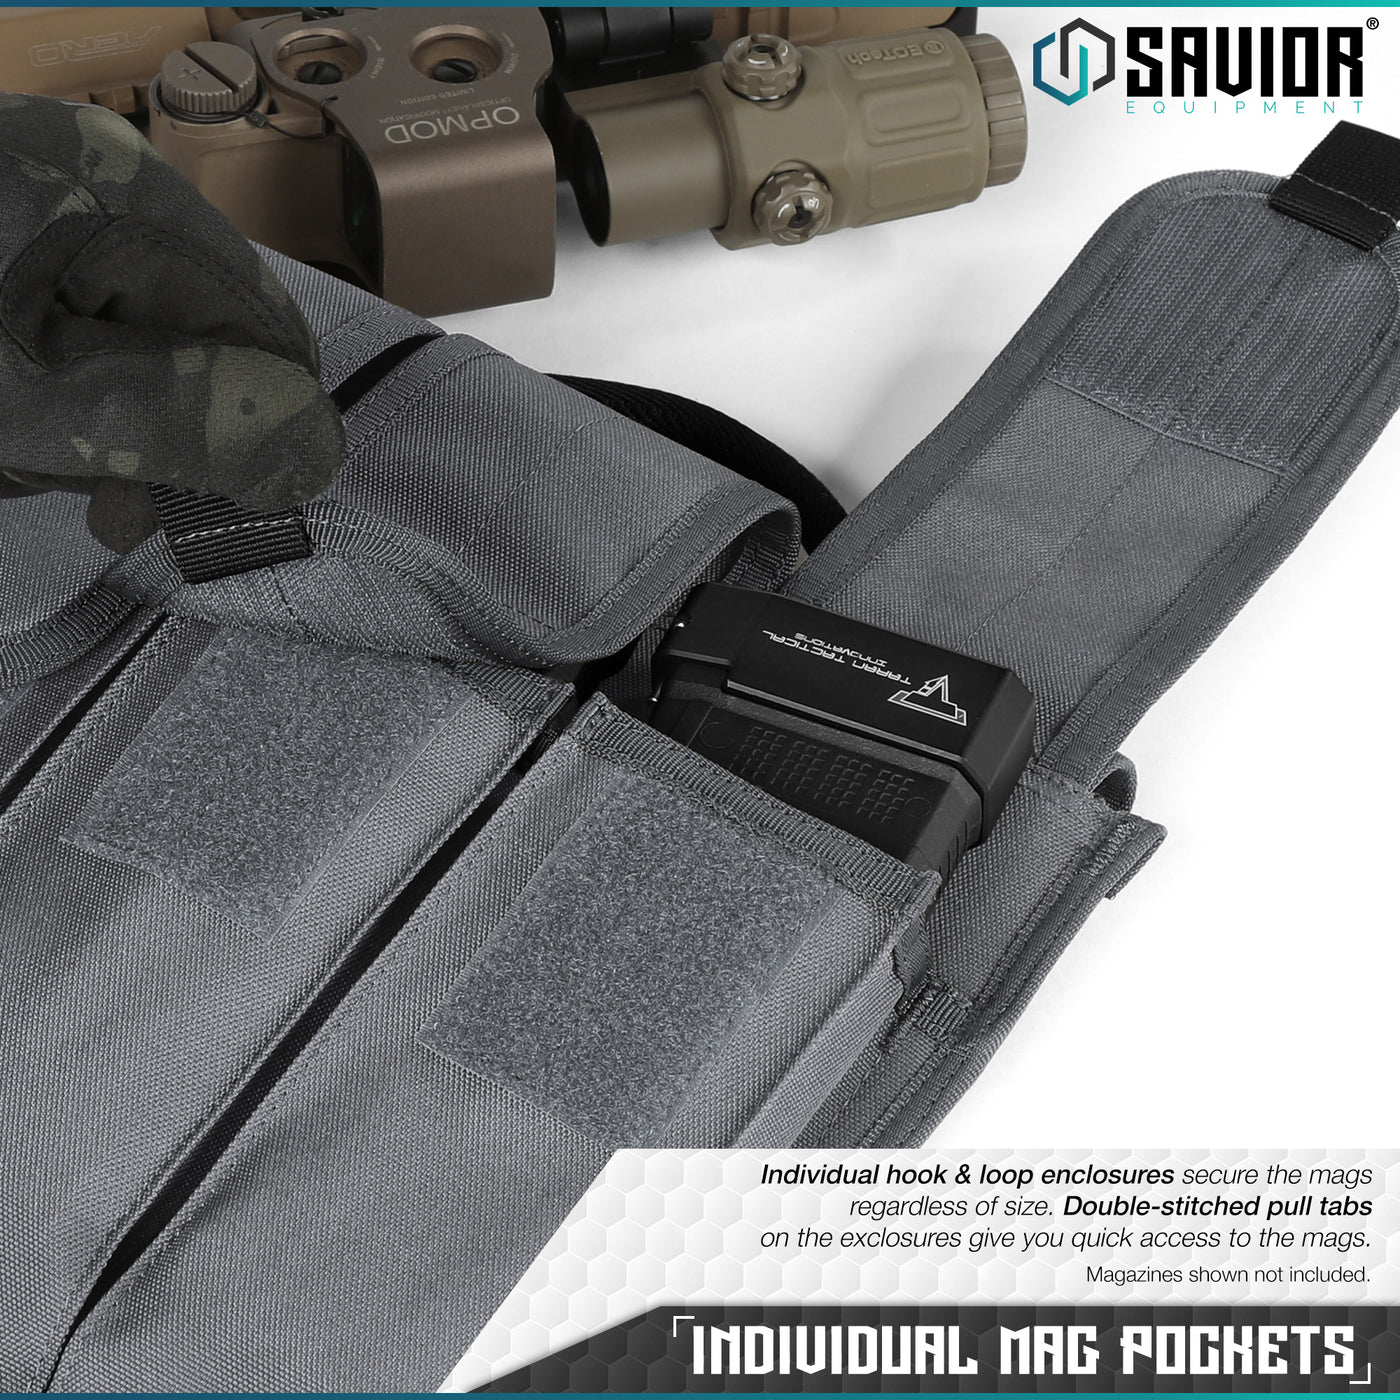 Adjustable Cover Strap - Hook & loop straps on the cover allow you to adjust length based on magazine size. Double-Stitched pull tabs give you quick access to the pockets.